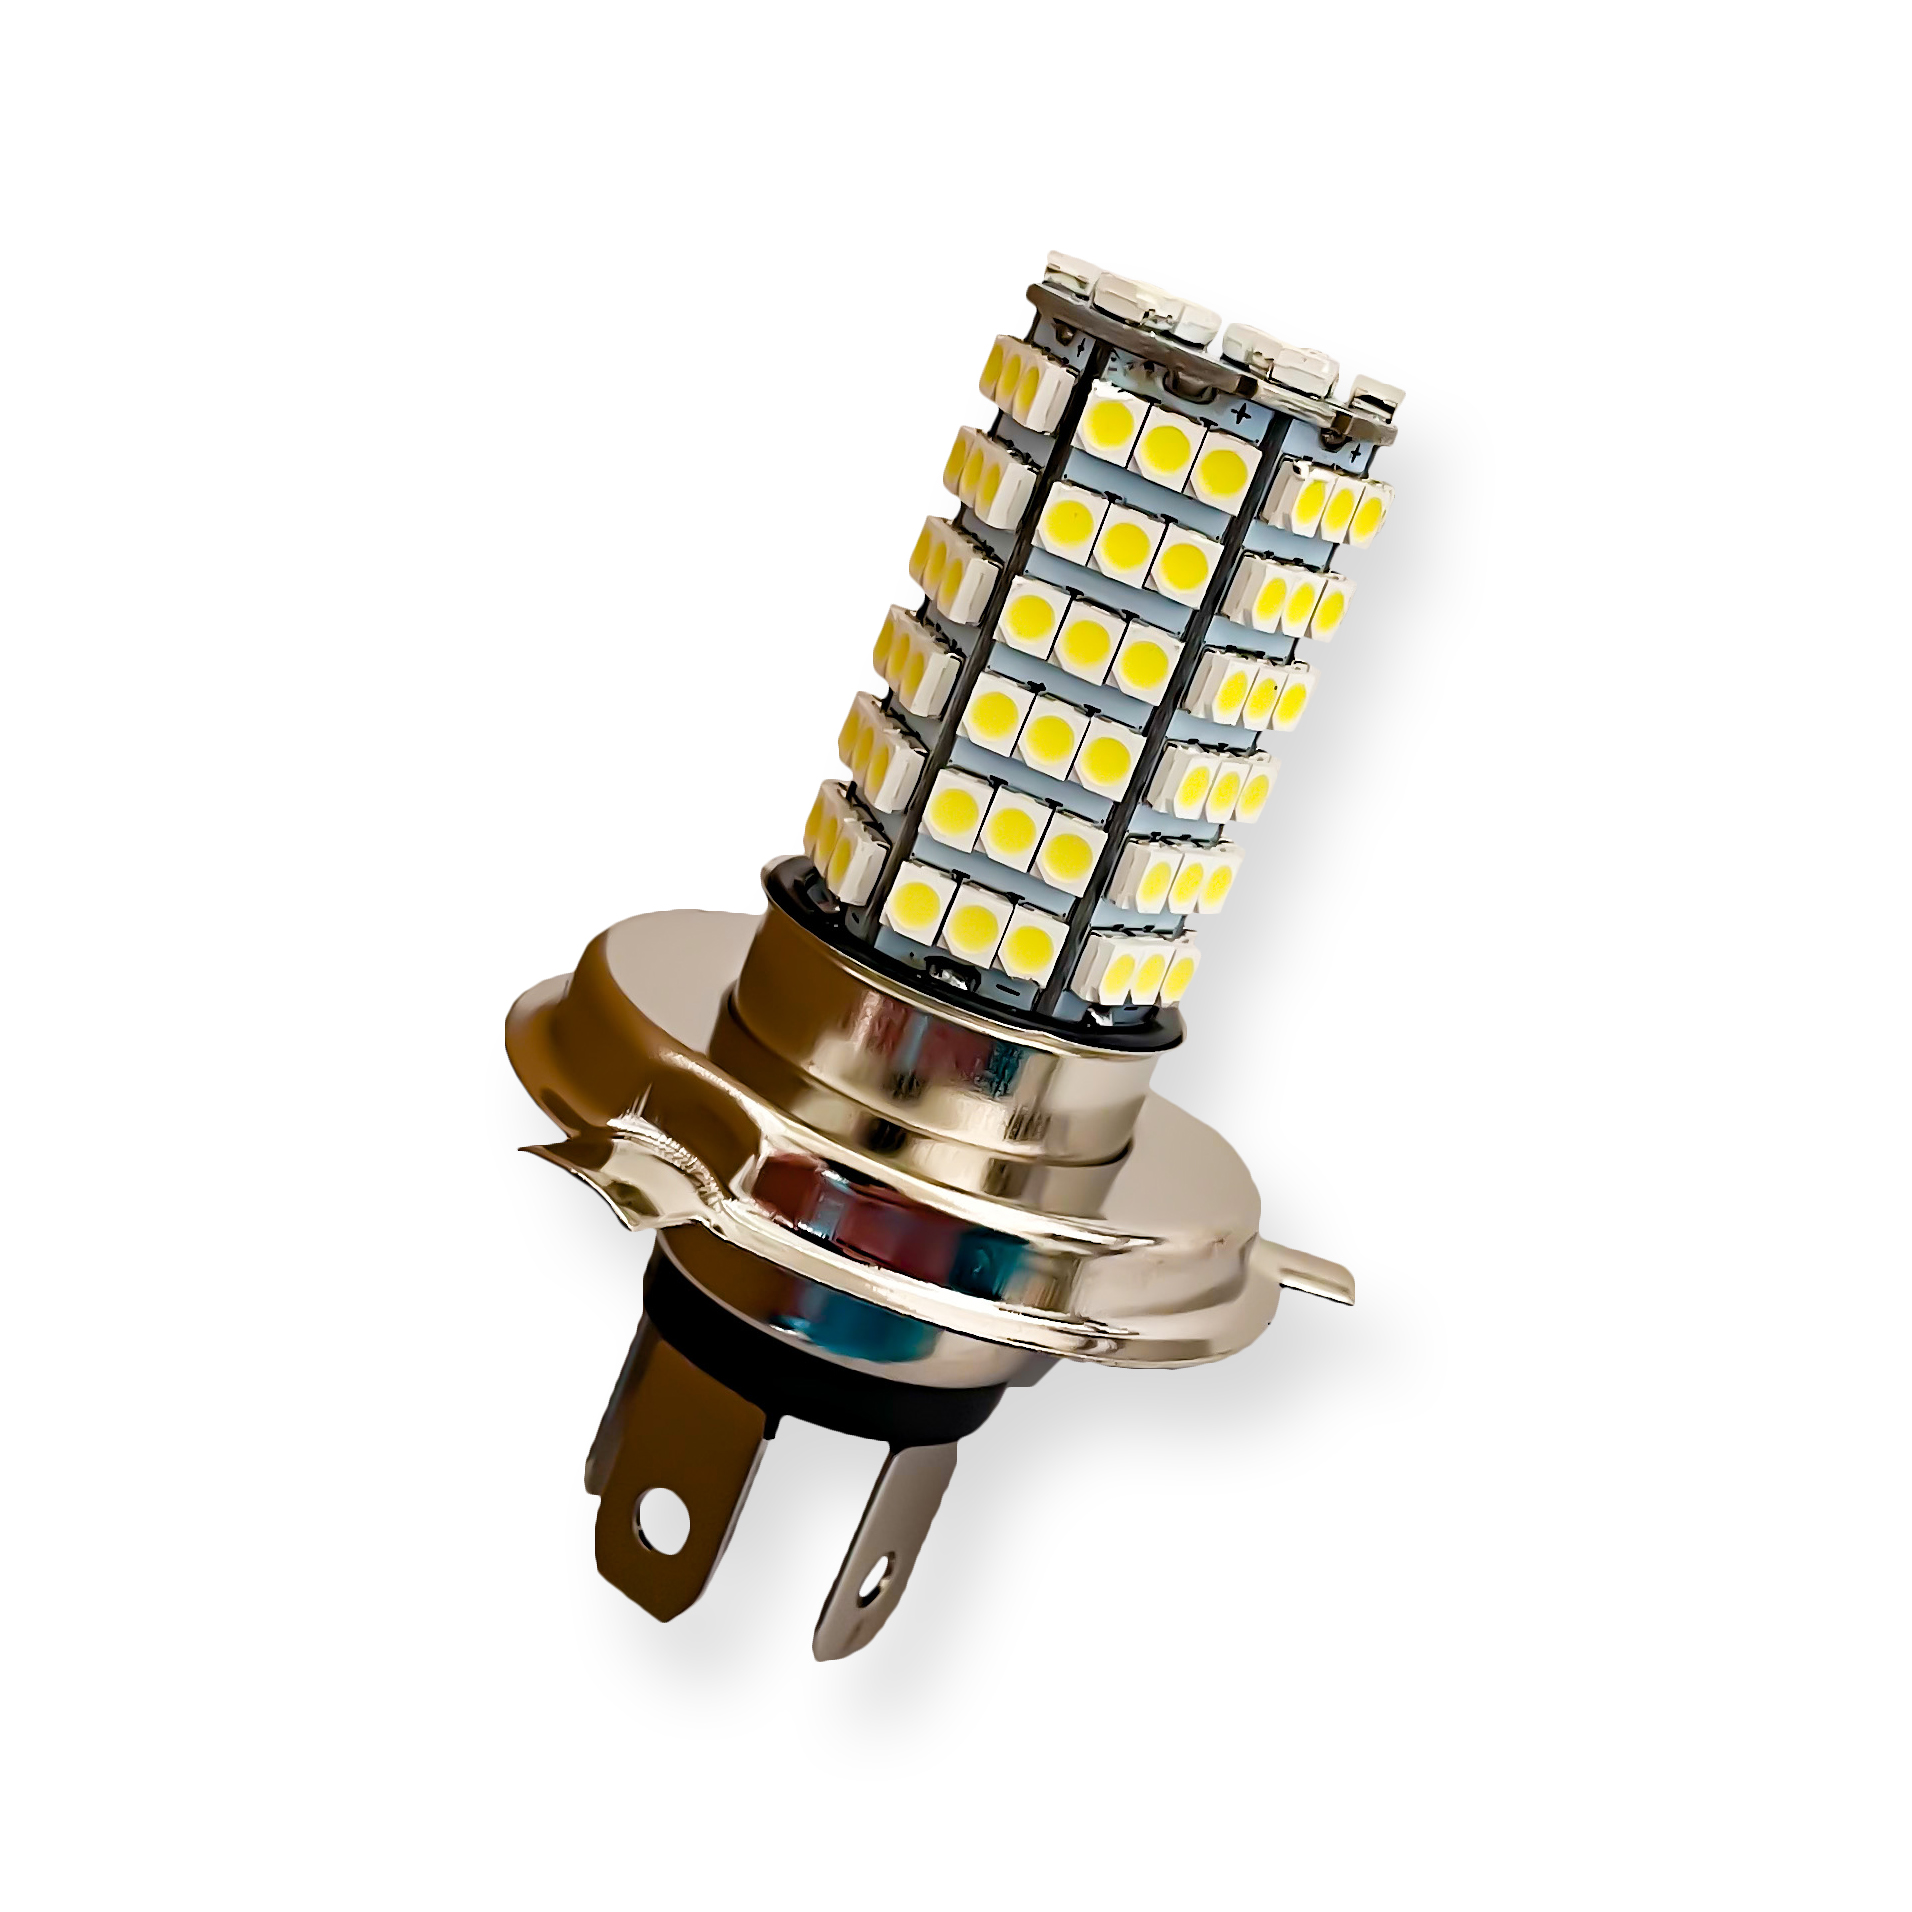 Lamp 12V - 35/35W H4 Power LED - HS1 / PX43T - Voorlamp Scooter